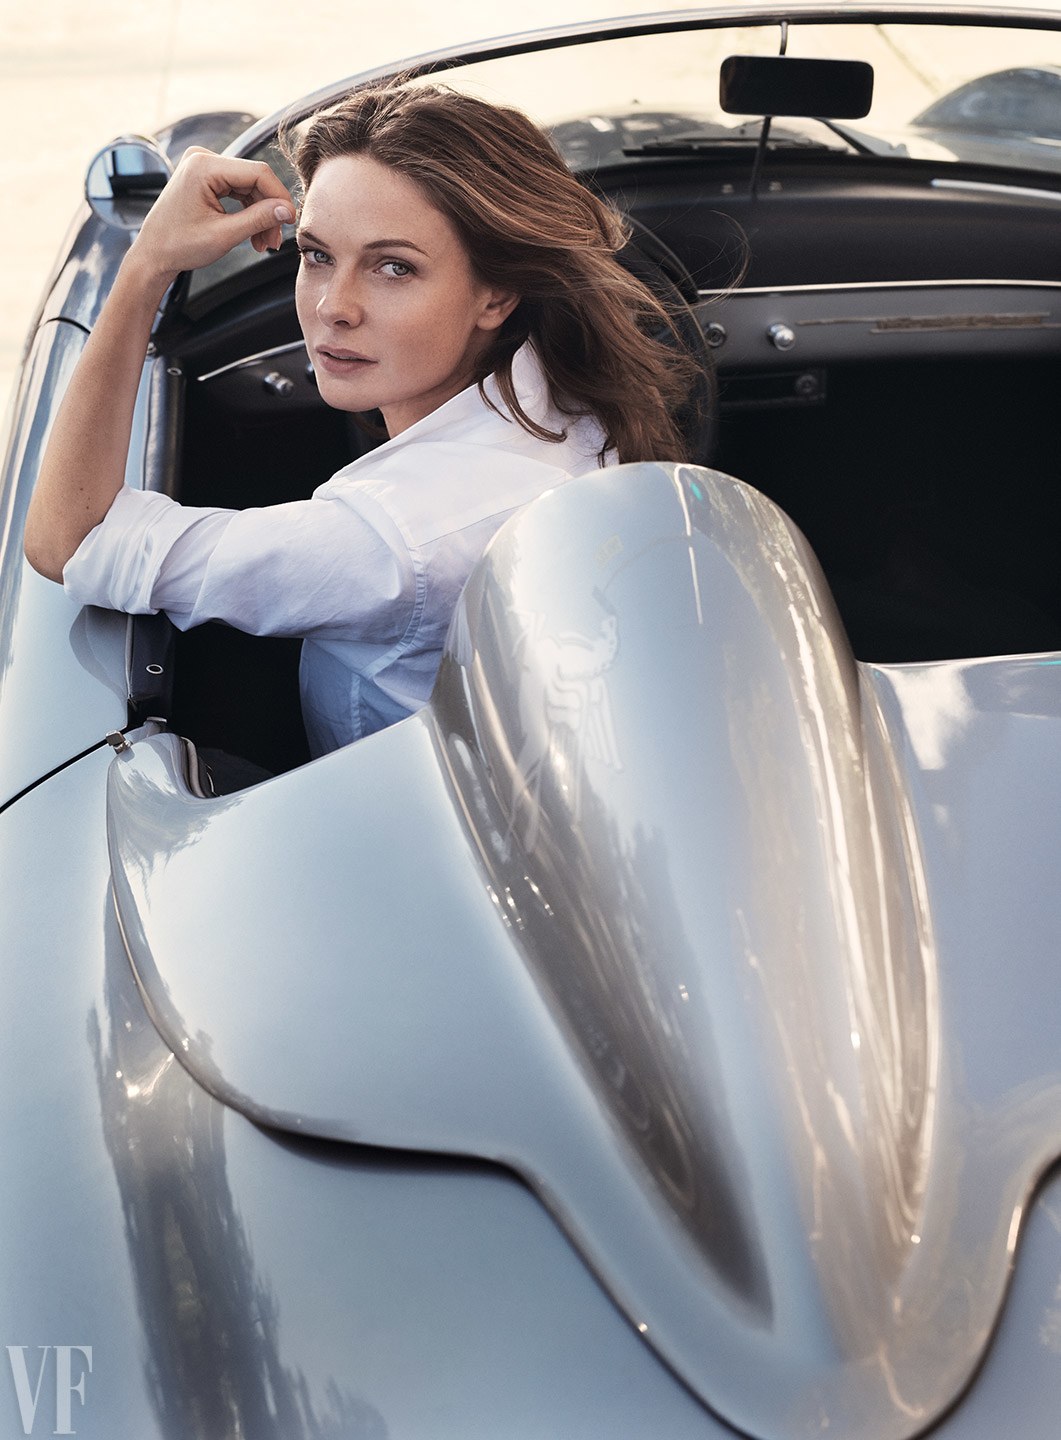 People 1061x1440 Rebecca Ferguson actress classic car cabriolet looking at viewer women white shirt